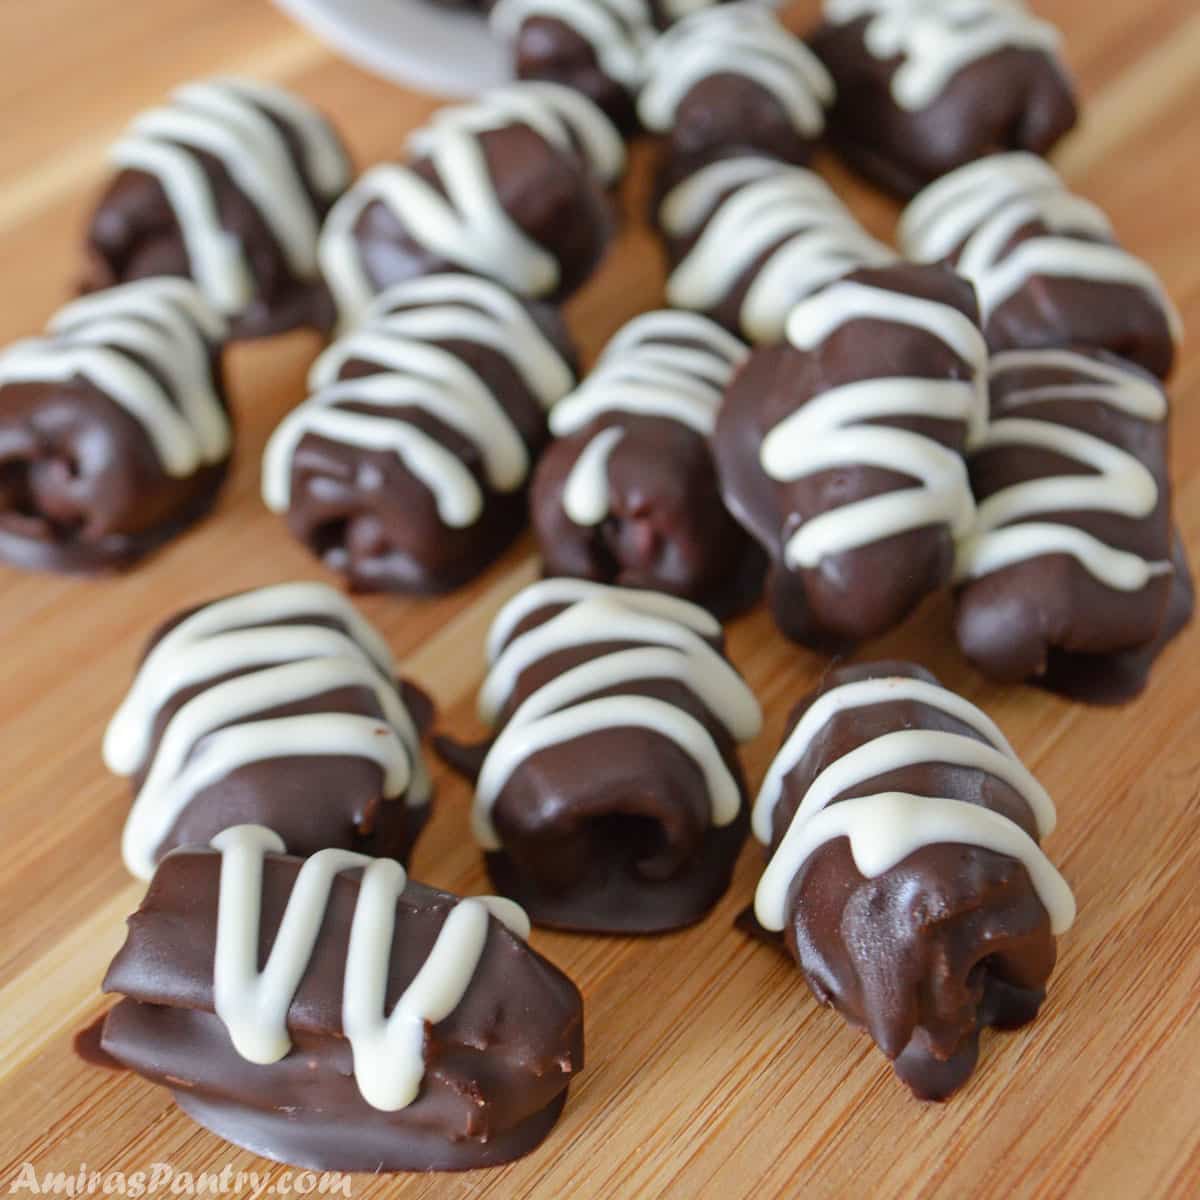 Chocolate covered dates scattered on a wooden surface.